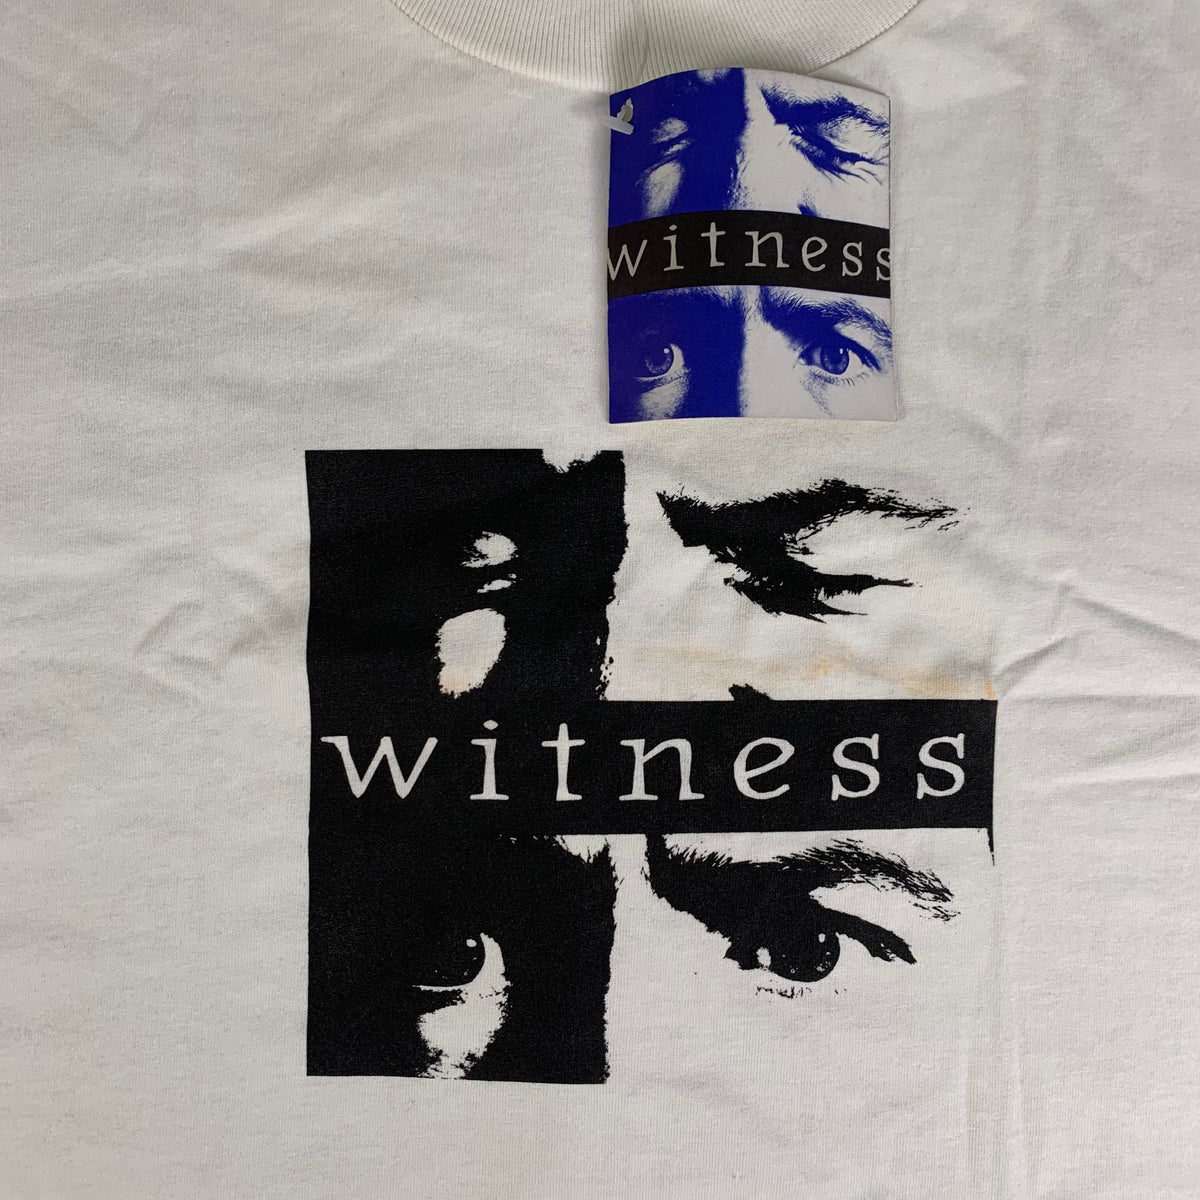 Vintage Reebok &quot;Witness&quot; Human Rights T-Shirt